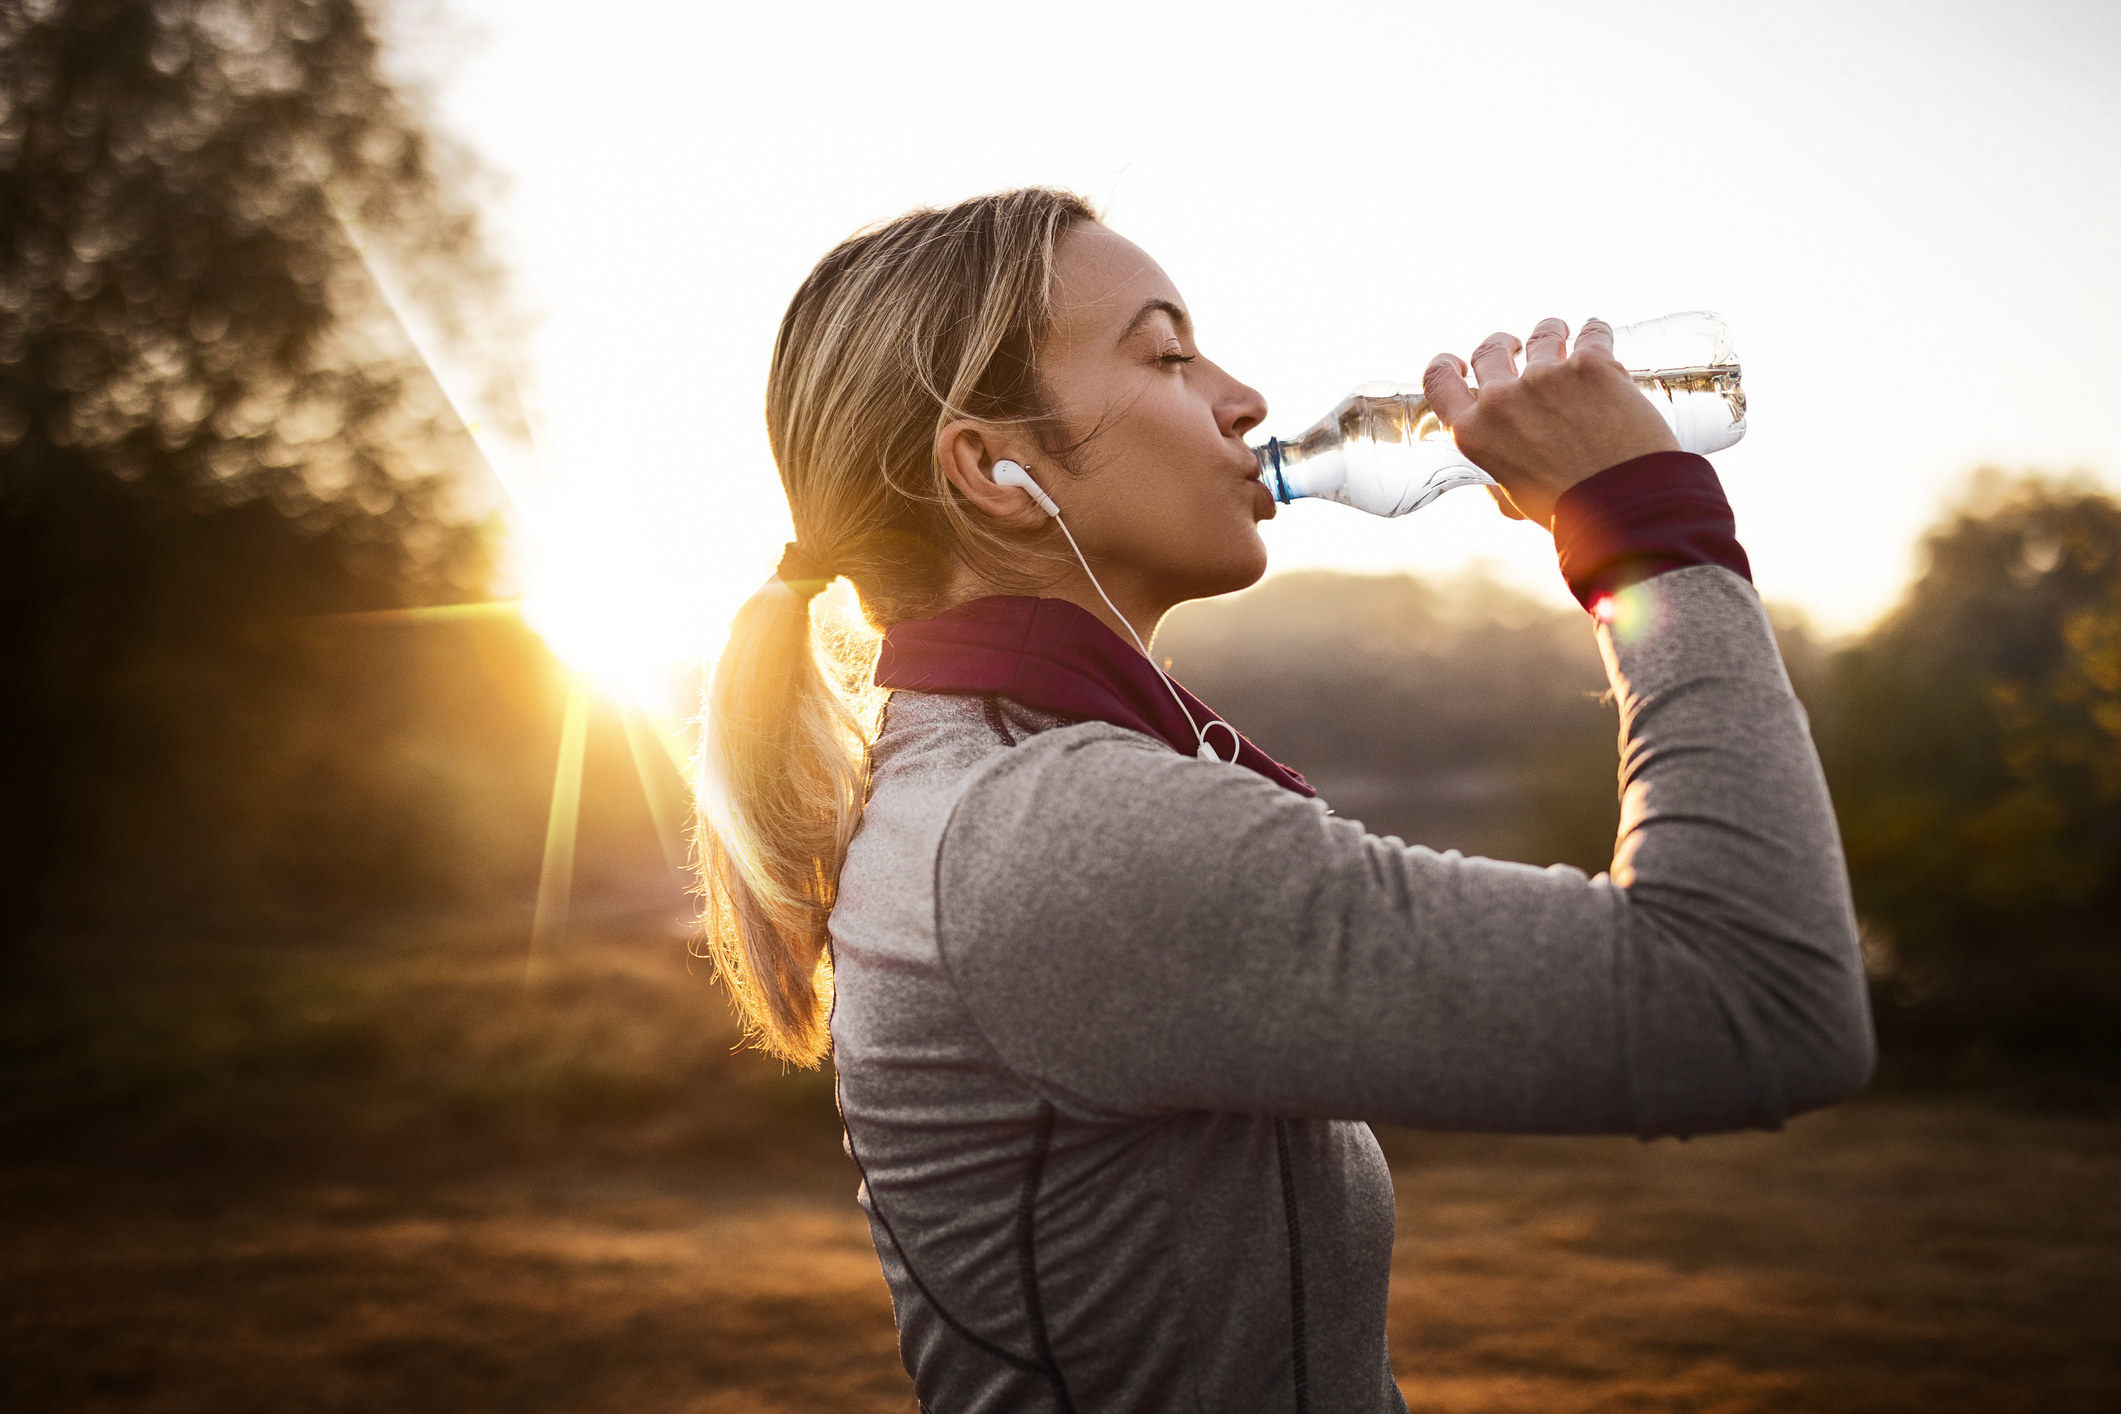 Young woman taking a water break from jogging in nature during sunrise